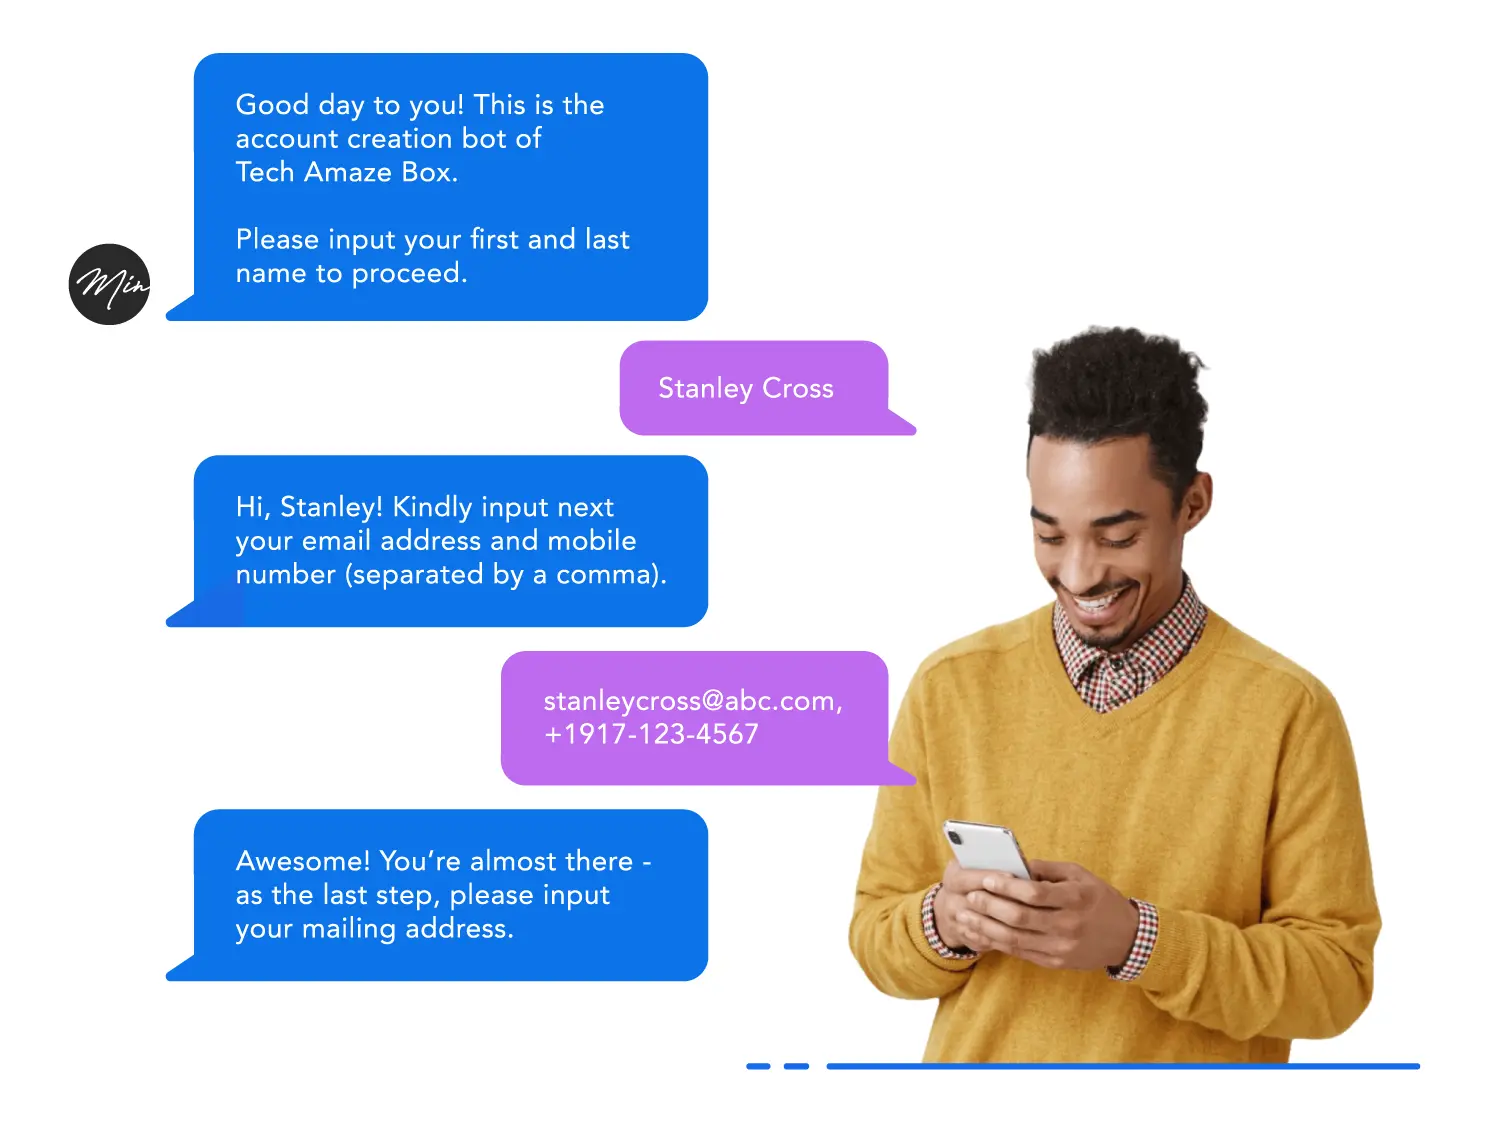 The customer onboarding process carried out conveniently via a messaging app.